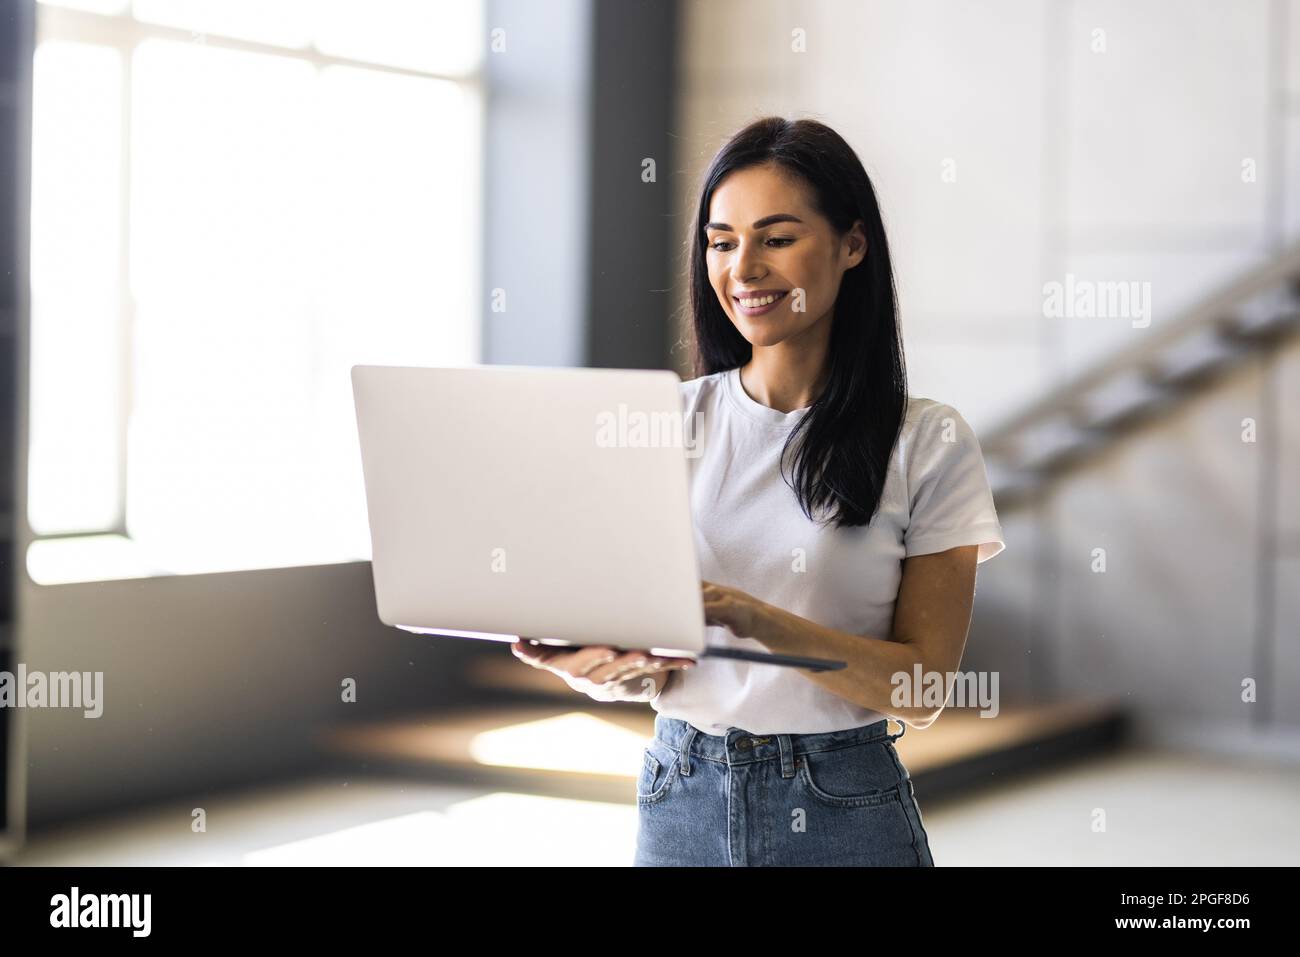 Beauitul young woman working using computer laptop concentrated and smiling Stock Photo